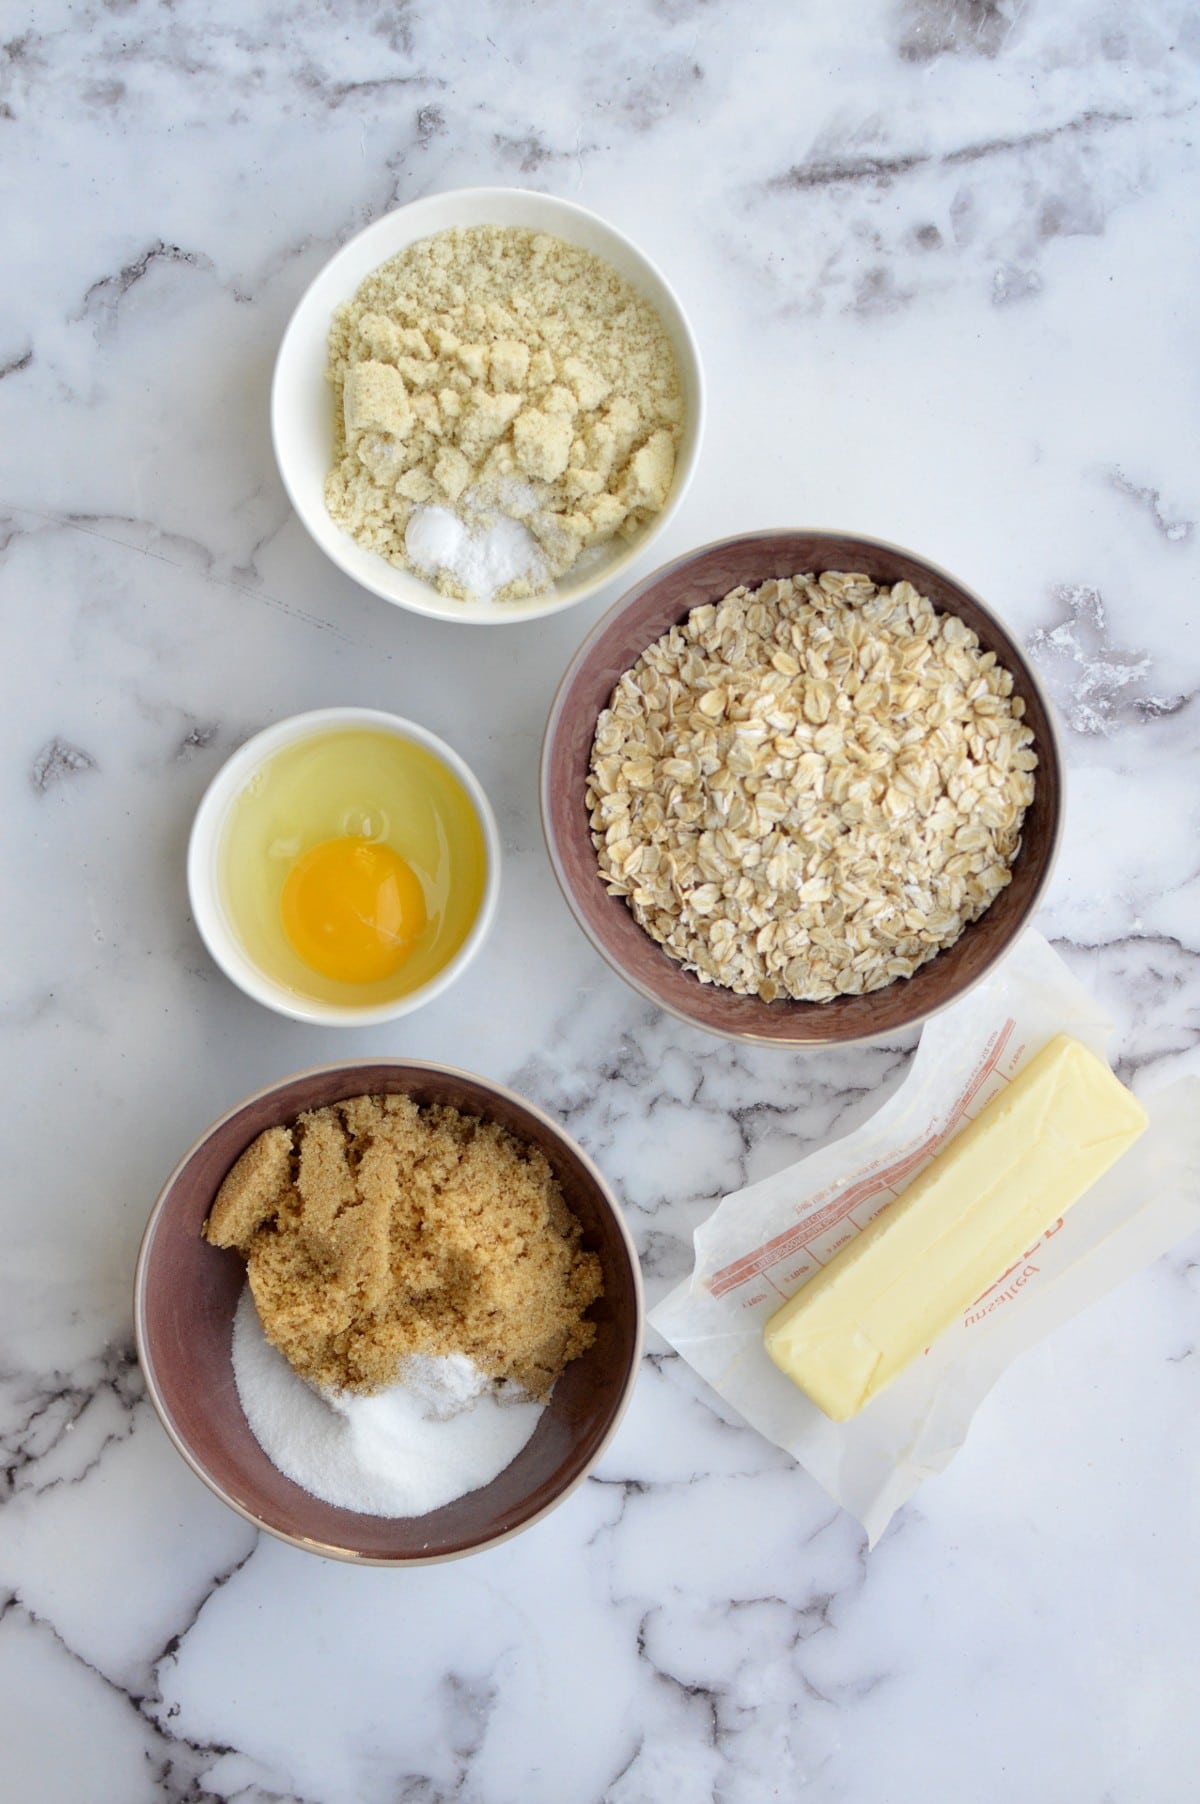 Ingredients for almond flour oatmeal cookies